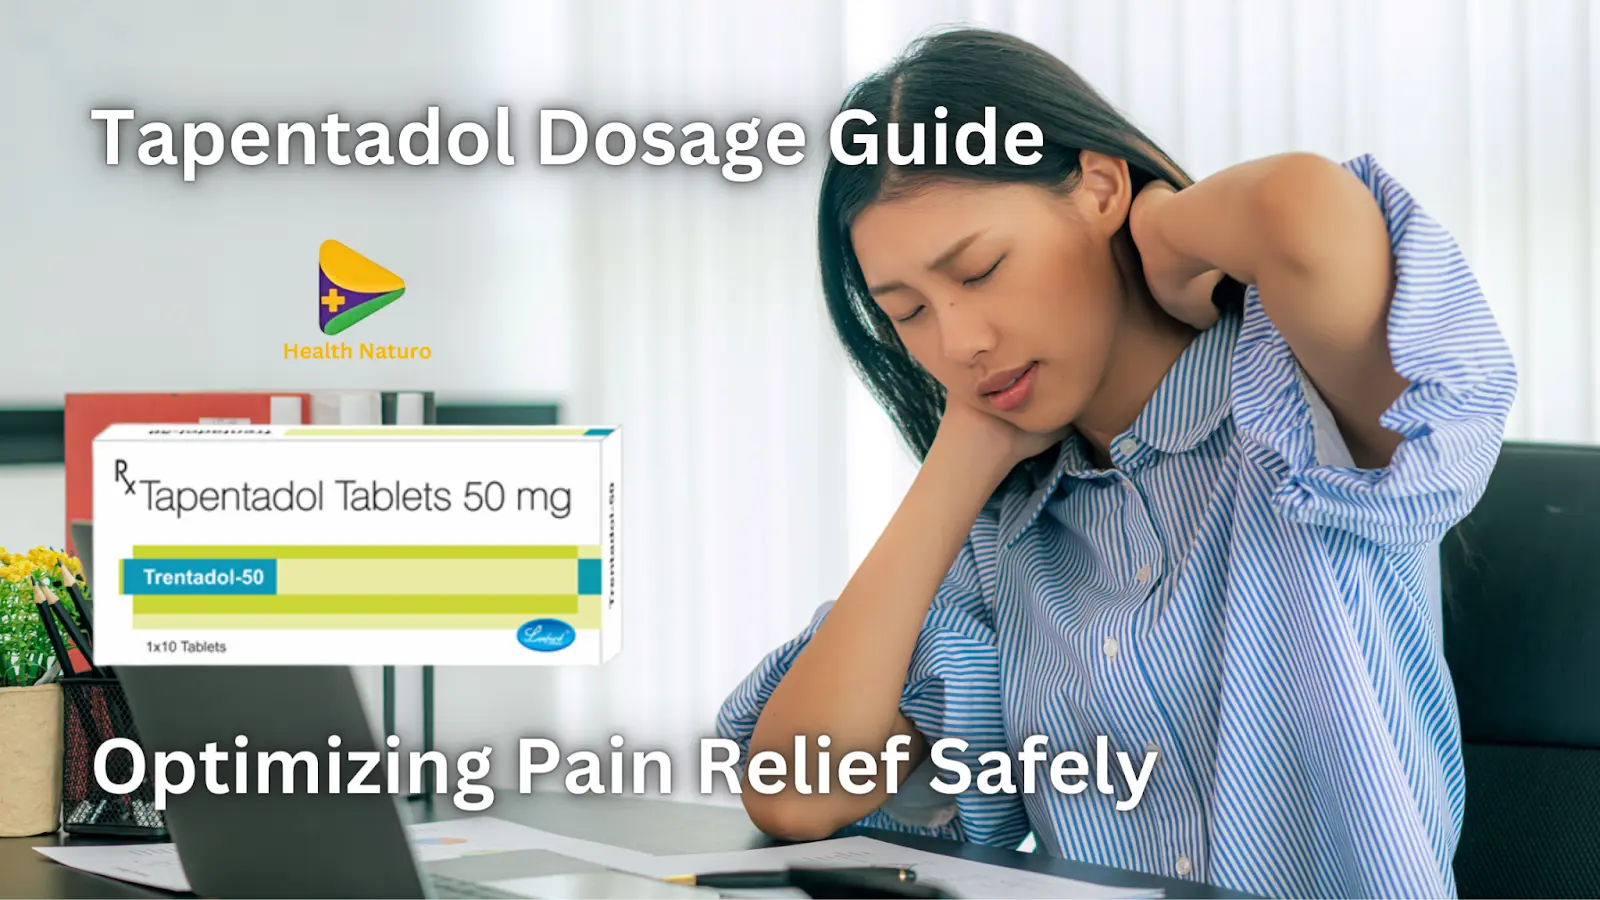 Tapentadol Dosage Guide: Optimizing Pain Relief Safely